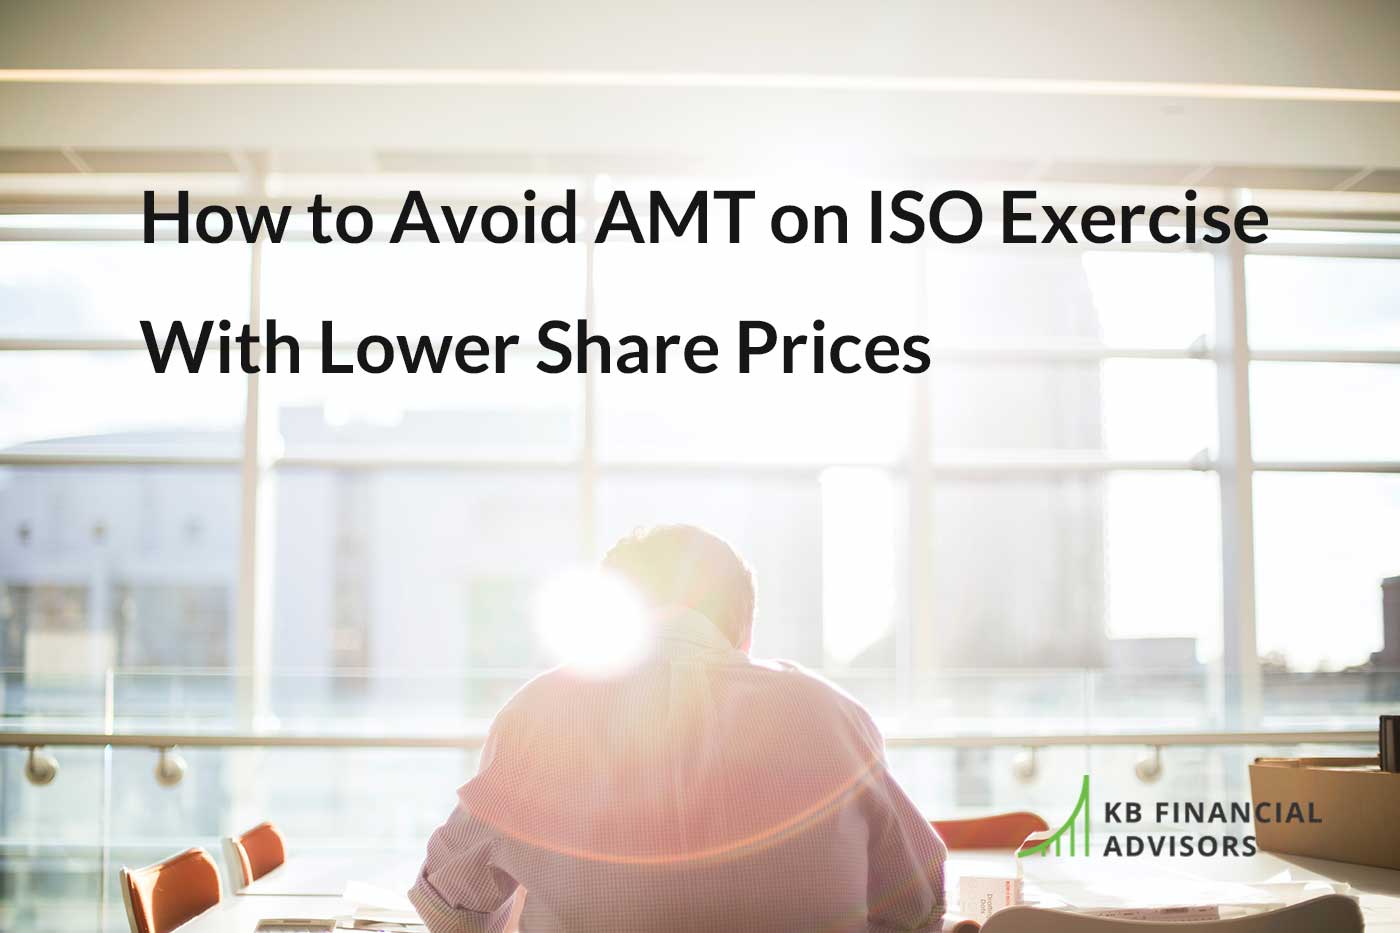 How to Avoid AMT on ISO Exercise With Lower Share Prices